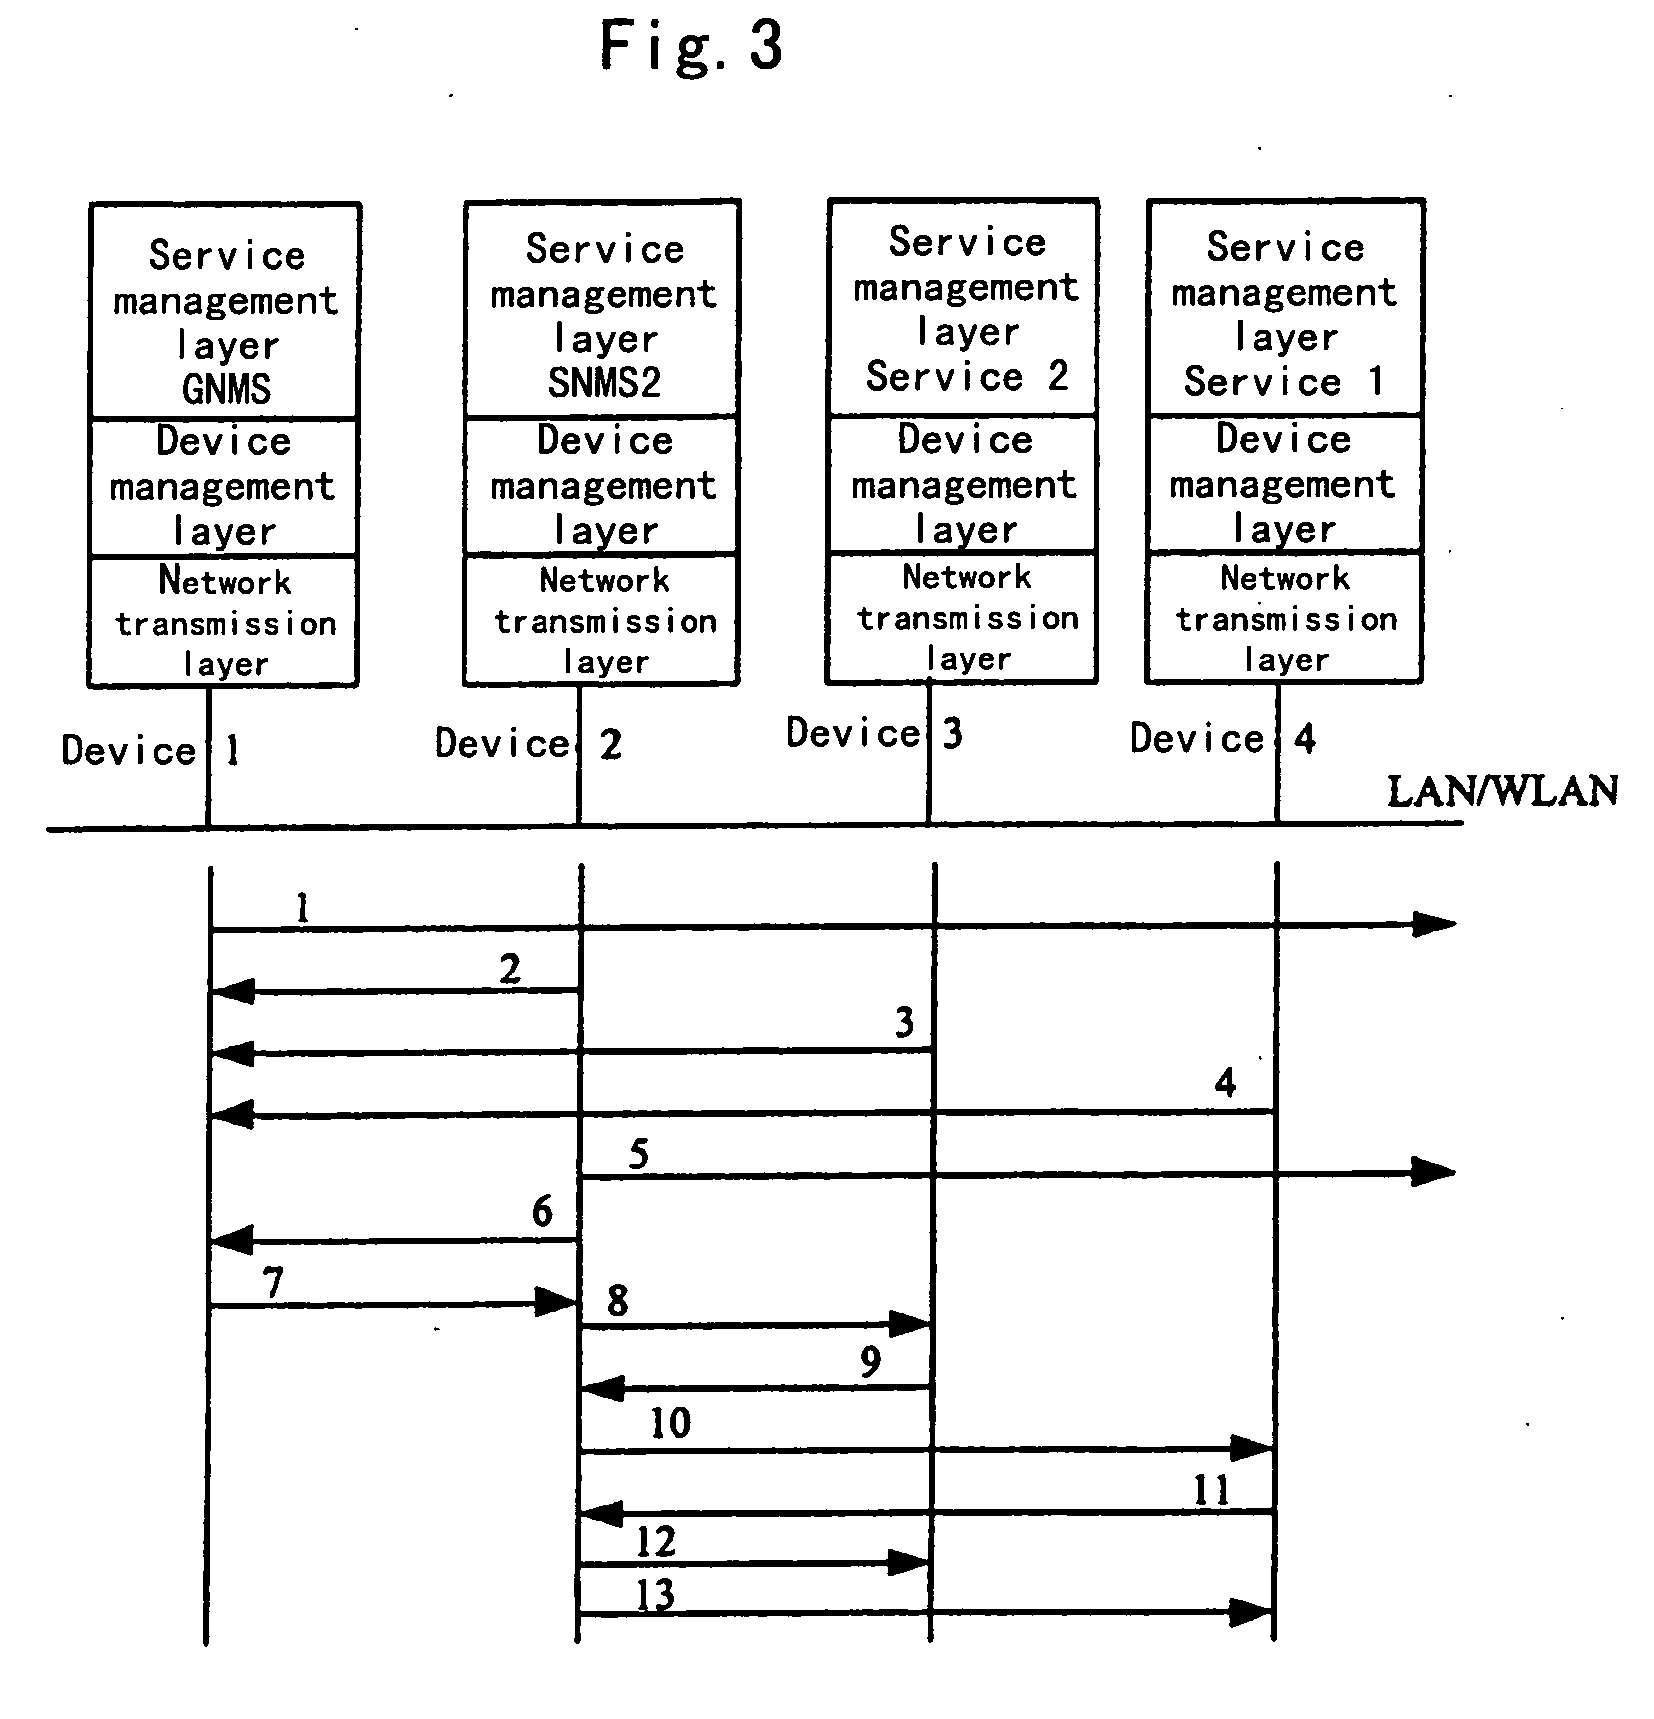 Method to realize dynamic networking and resource sharing among equipments